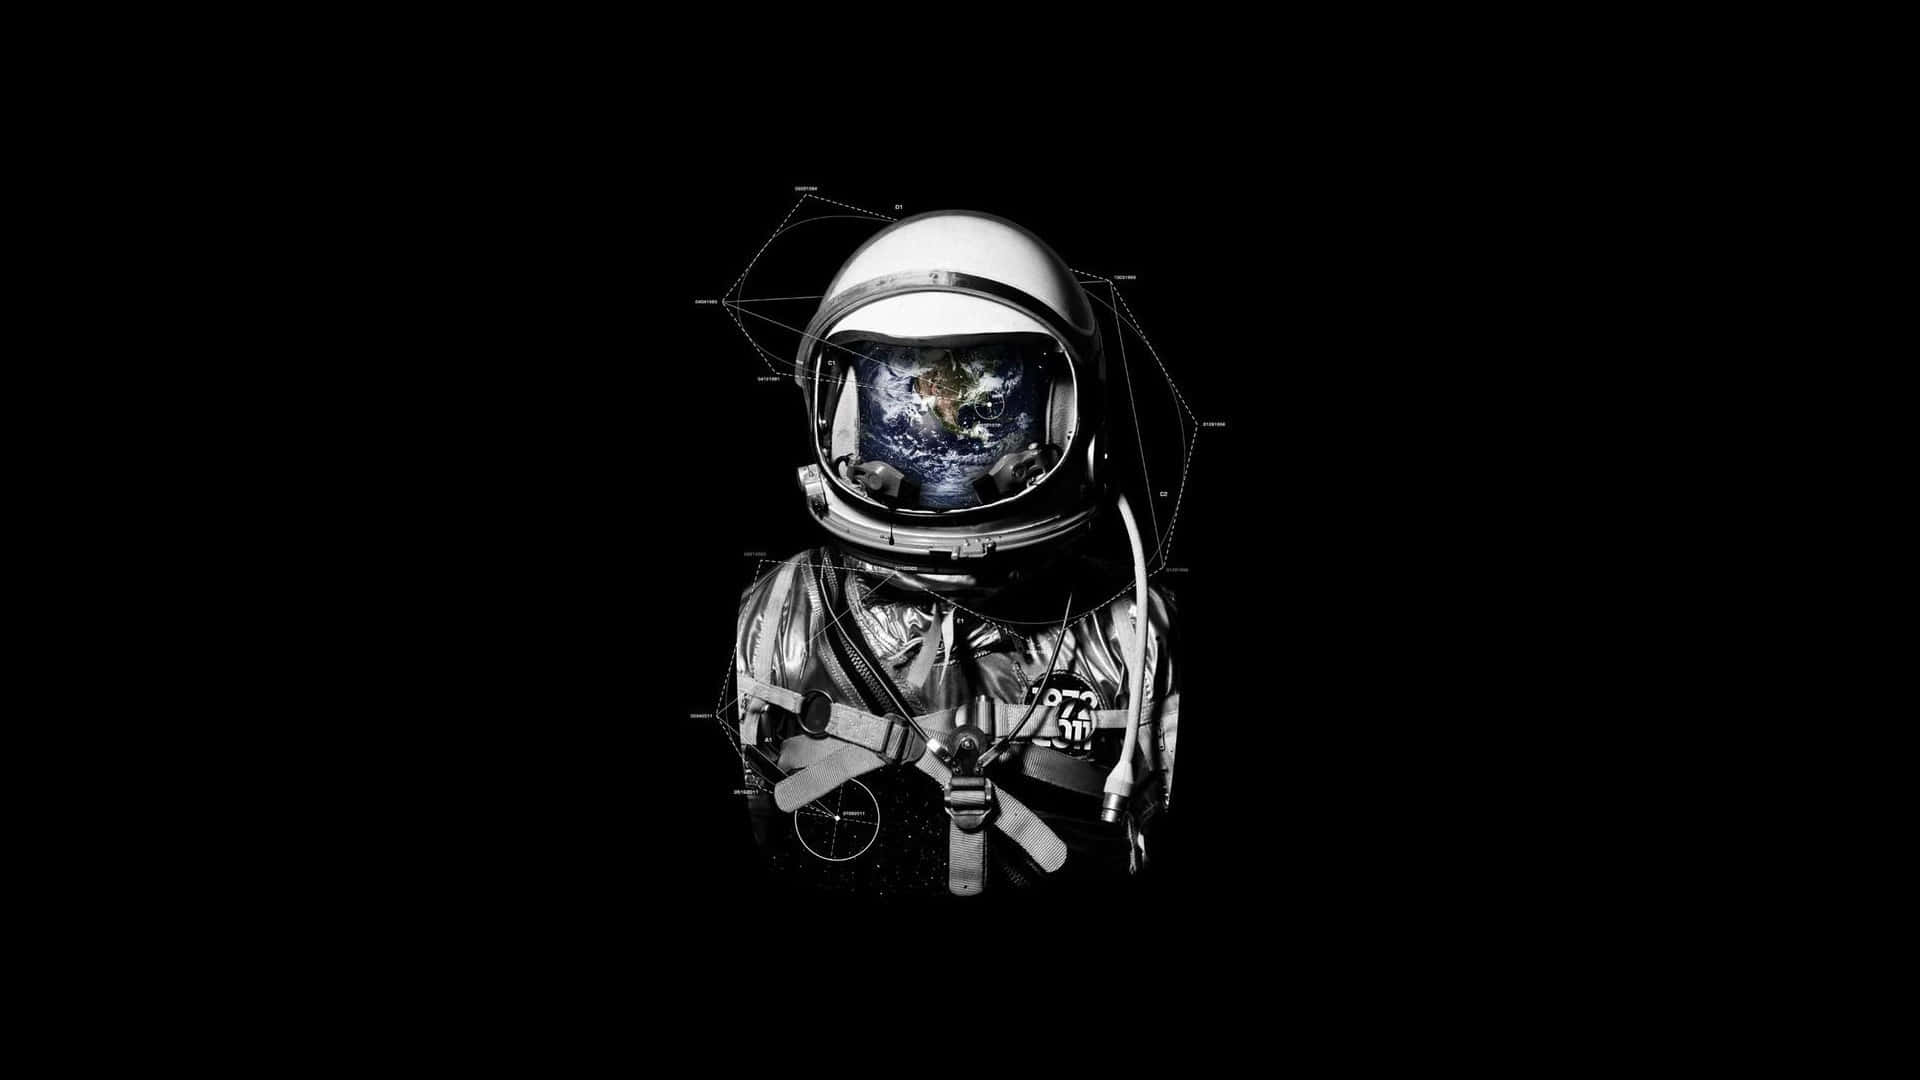 Image  Artful Use of Black and White in Space Wallpaper